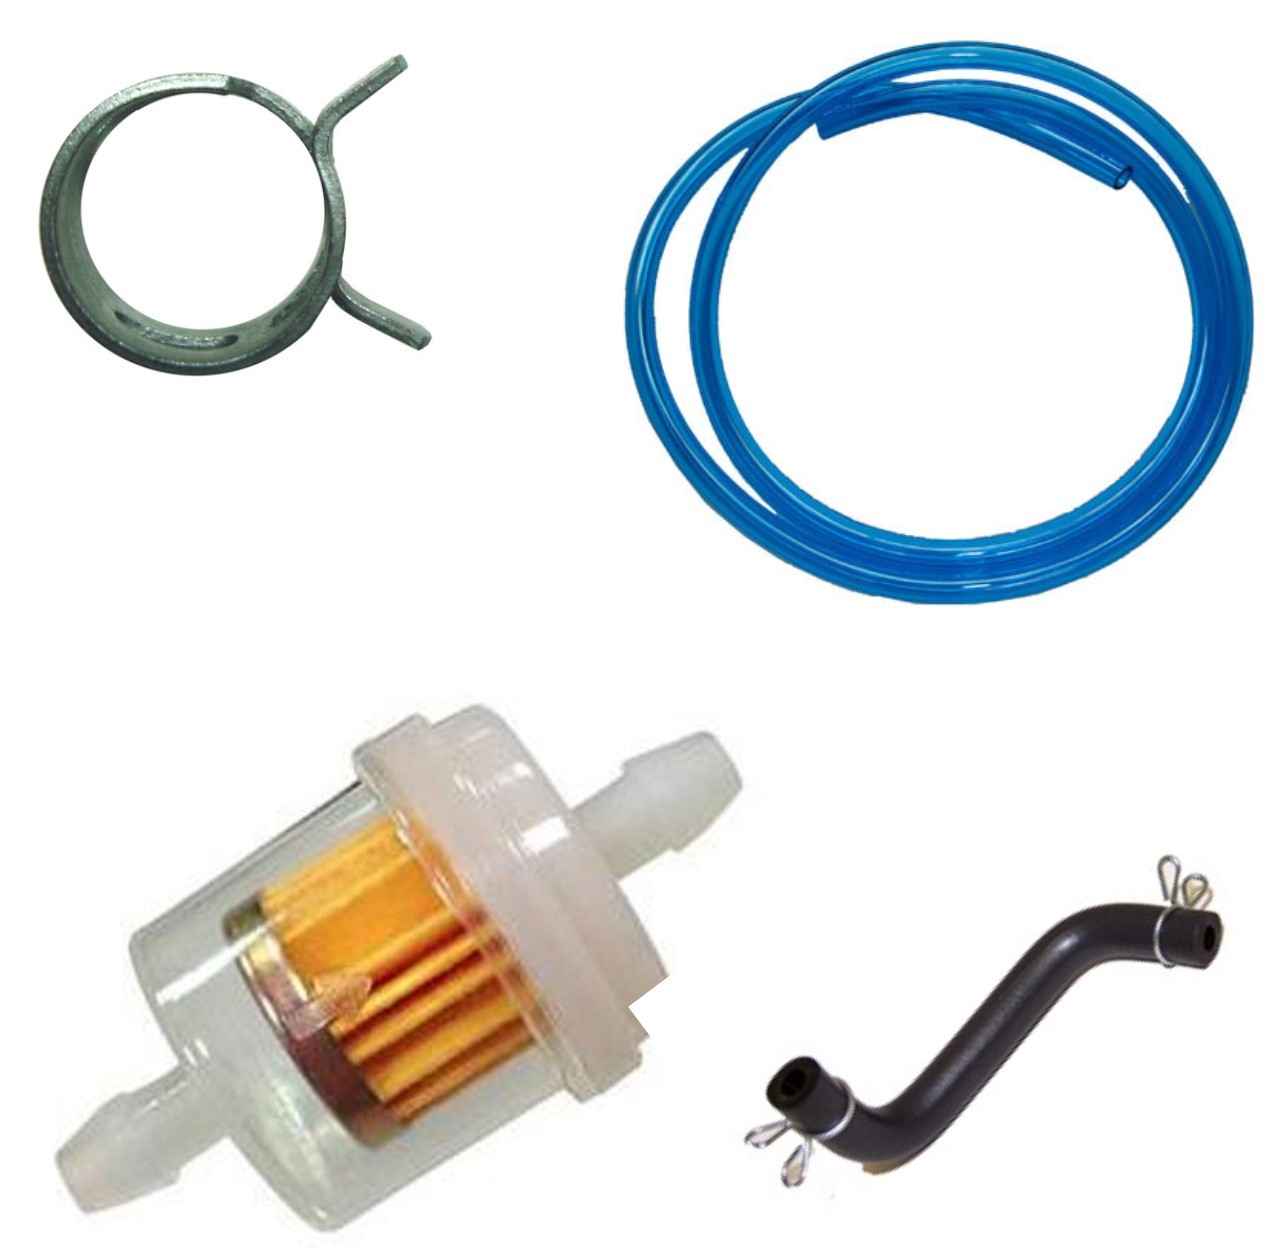 Fuel Lines, Filters, Clamps